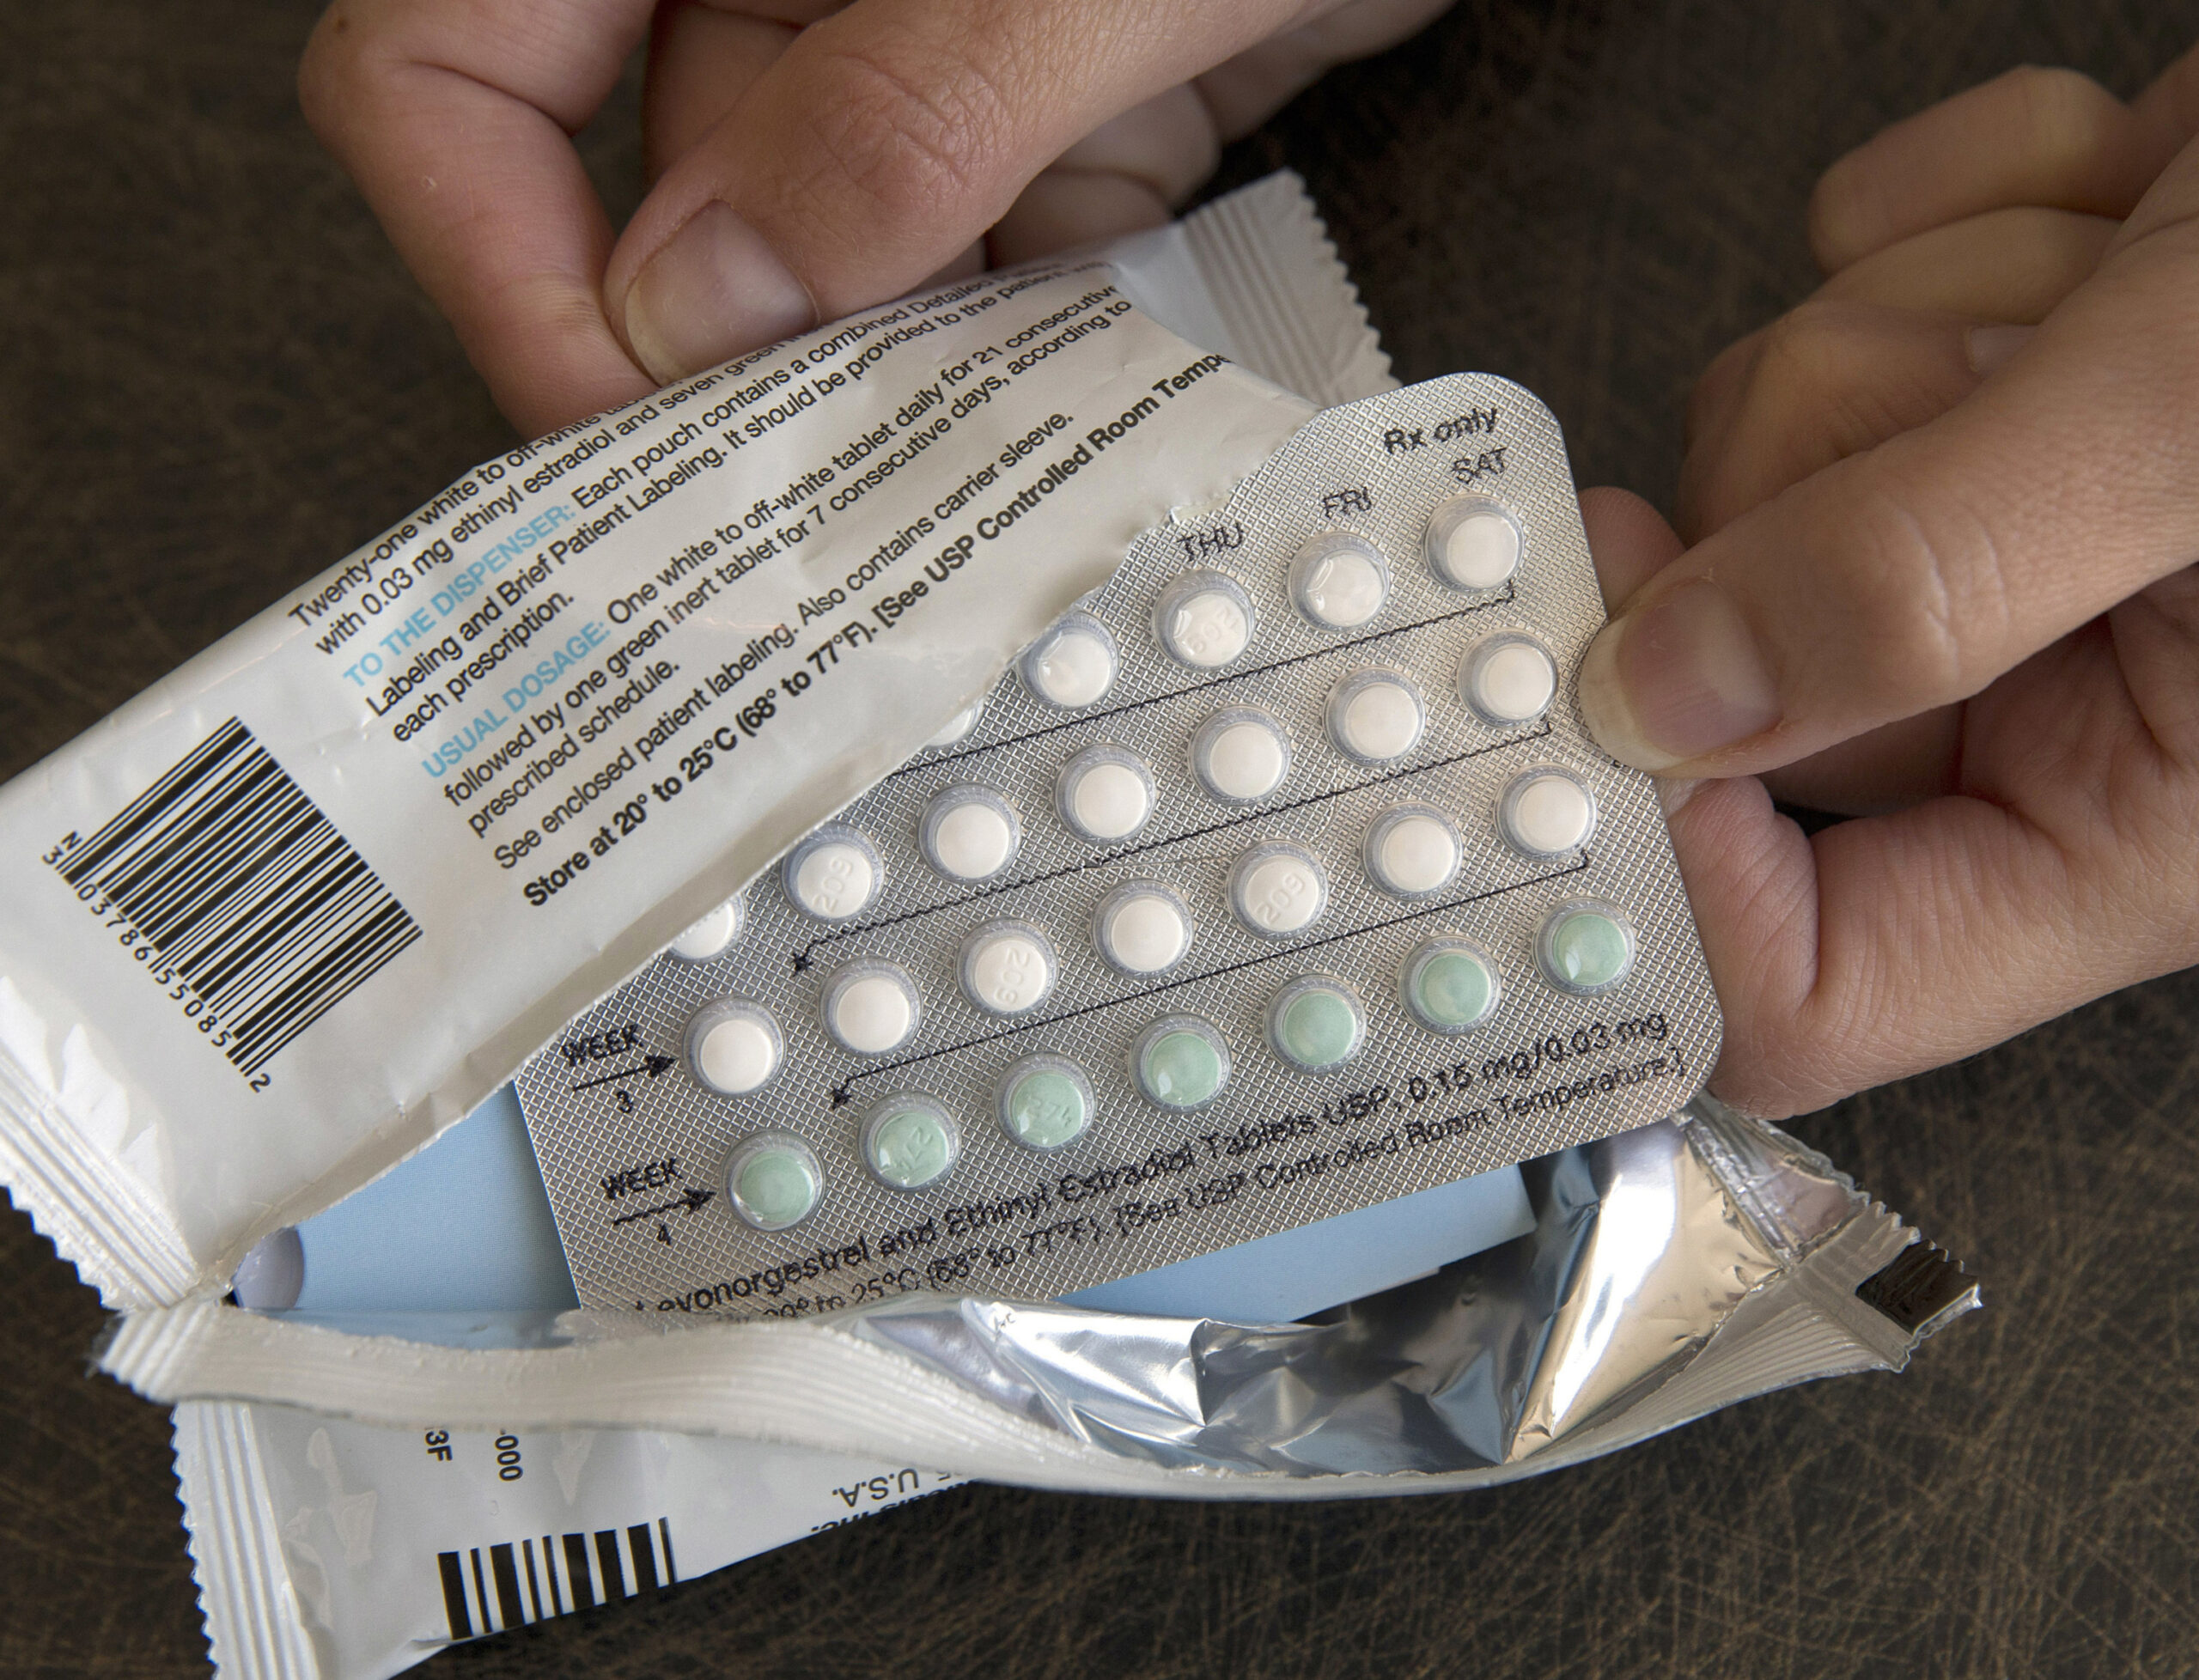 Over-The-Counter Birth Control? Drugmaker Seeks FDA Approval